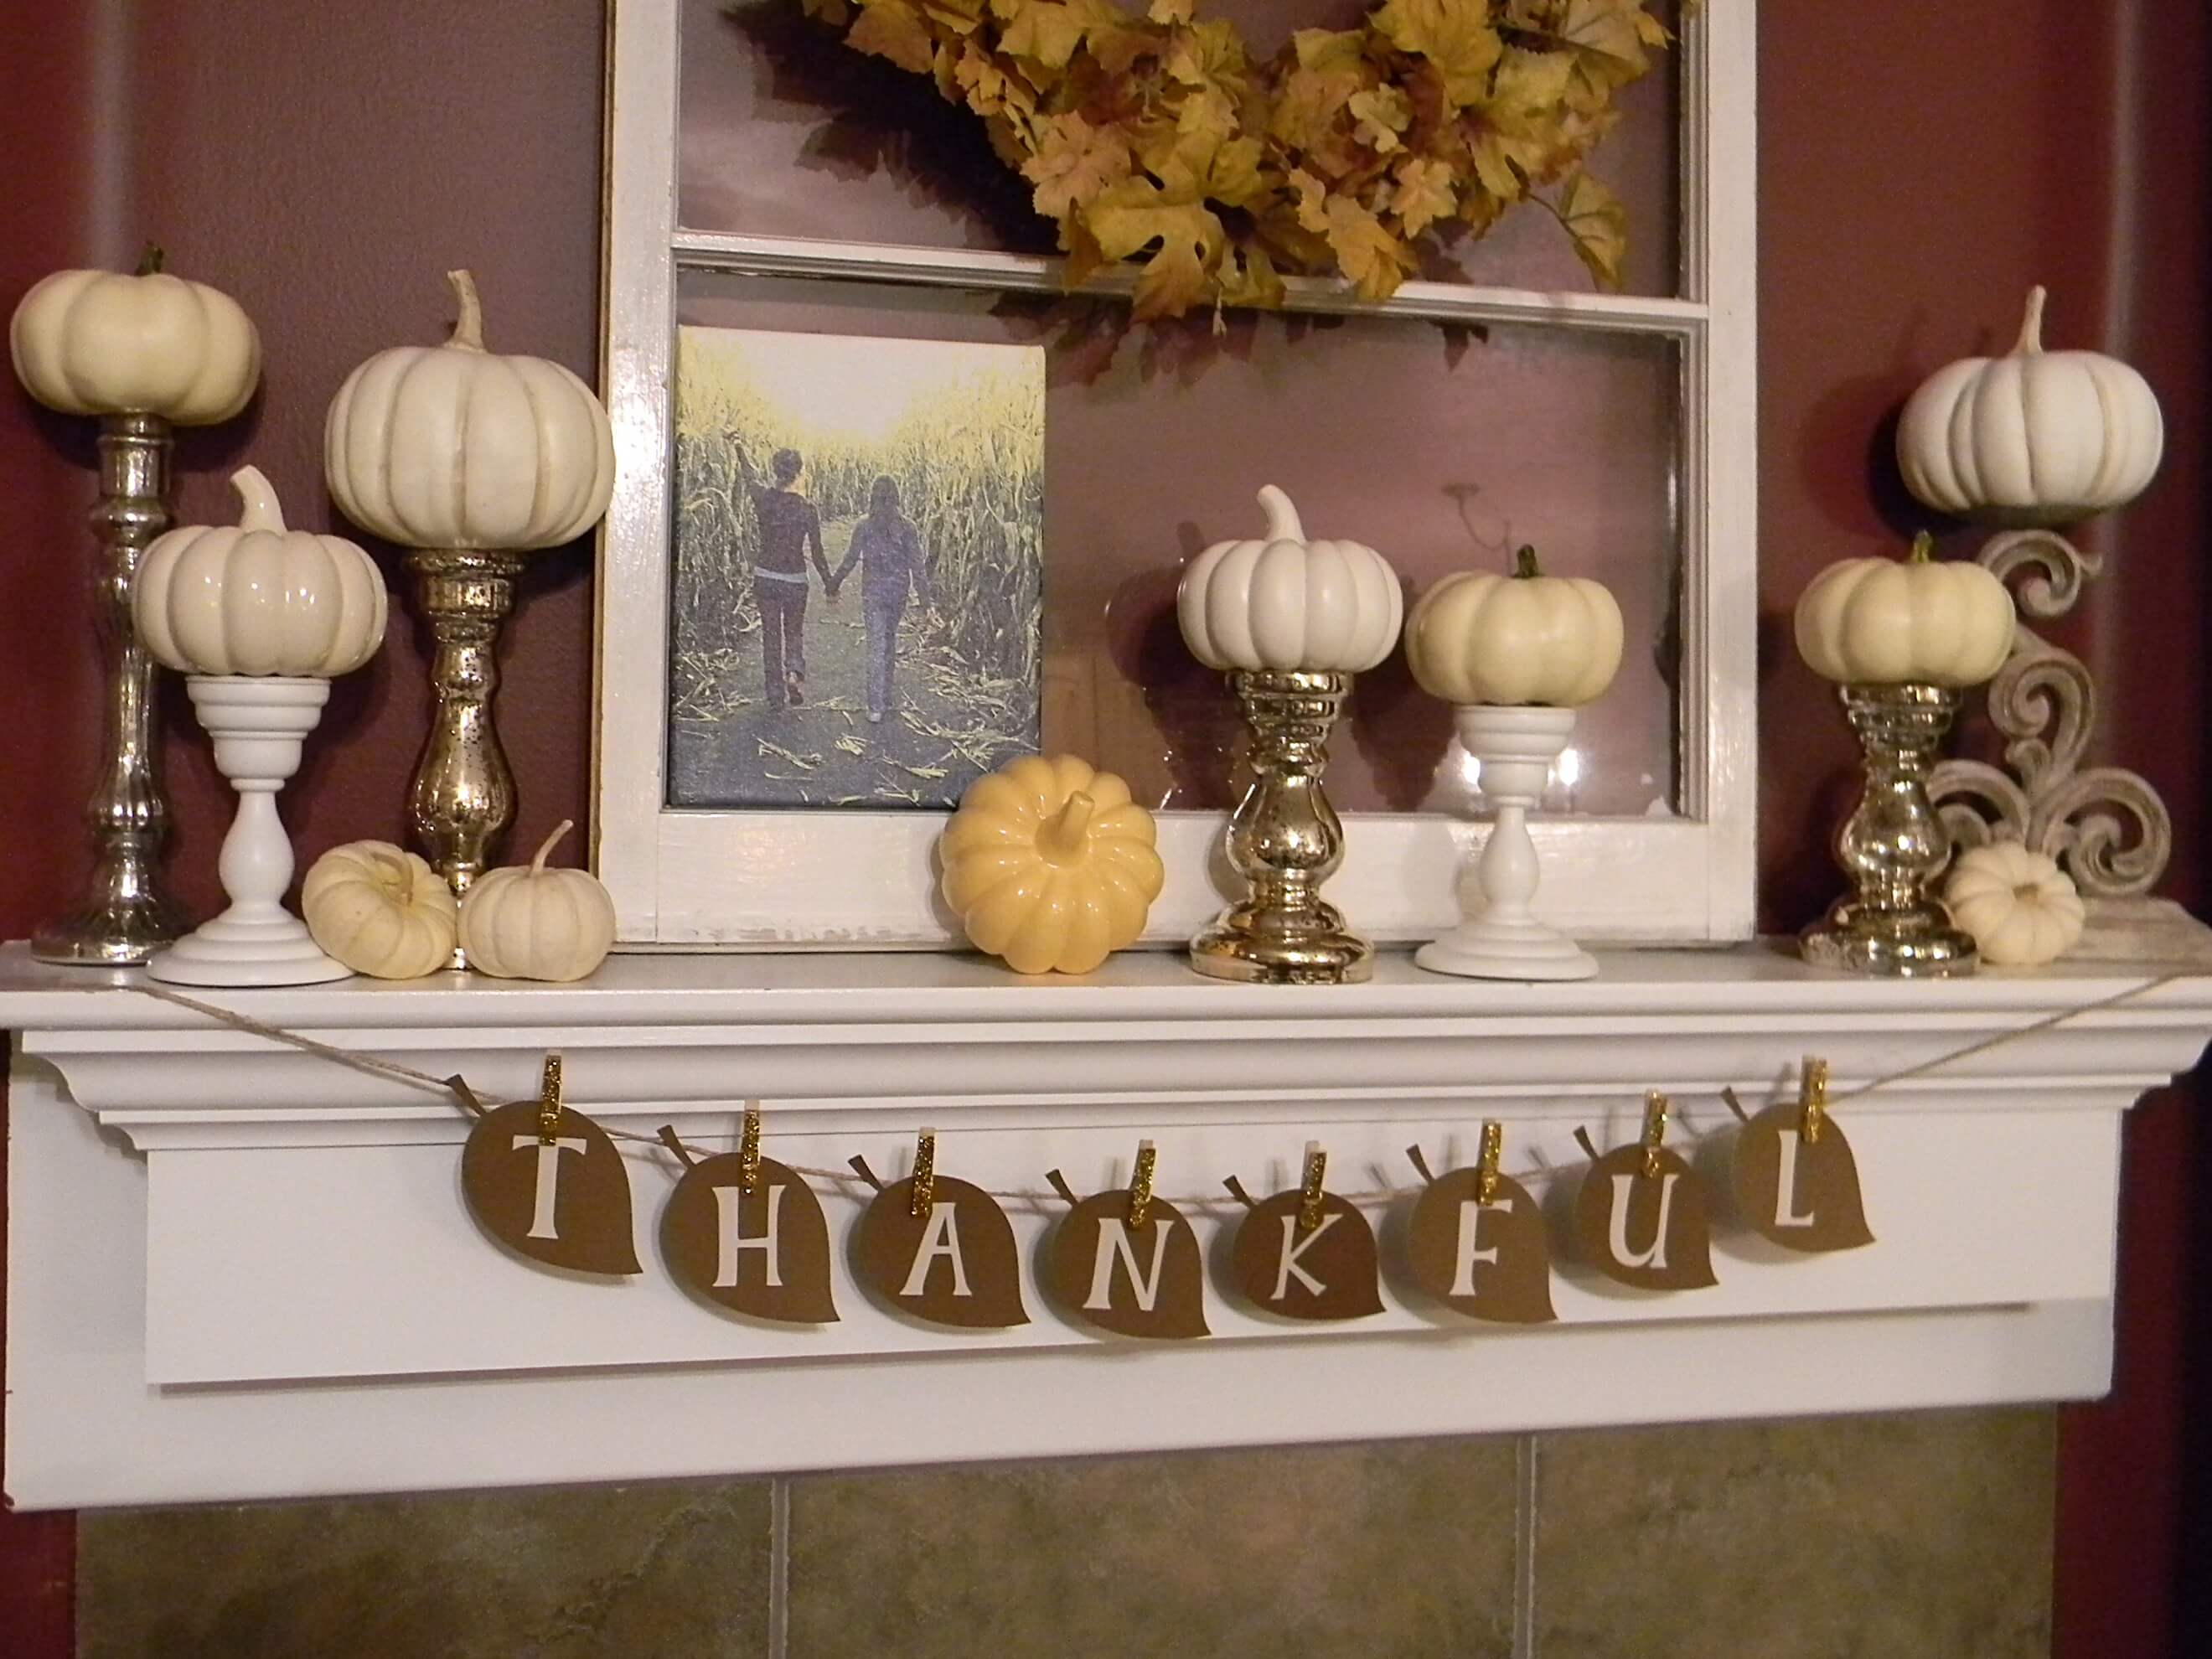 Fireplace mantel decor in the form of white pumpkins everywhere